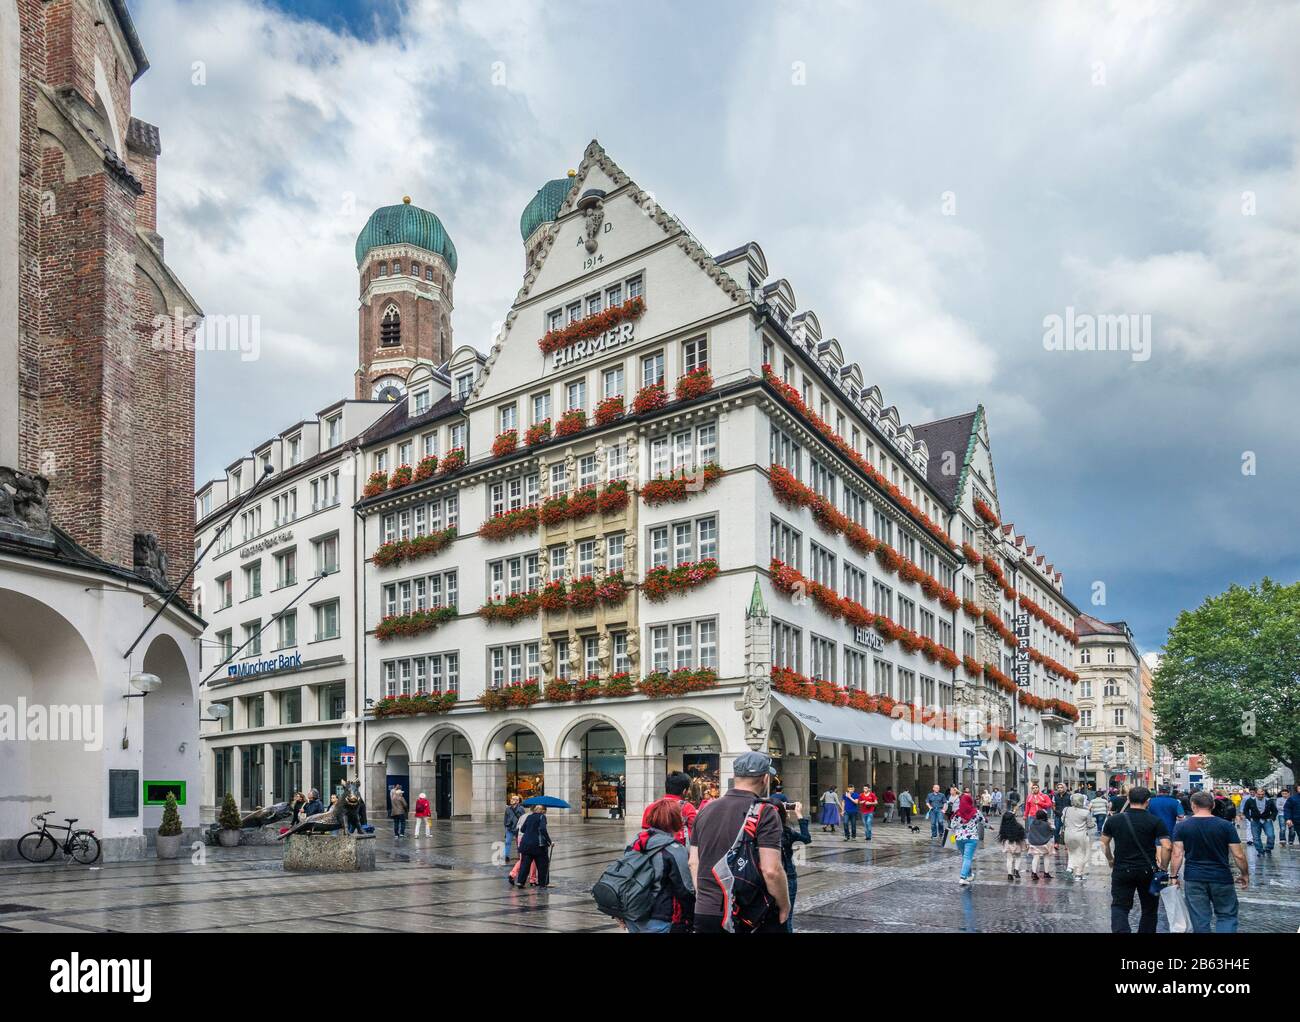 Kaufingerstraße is one of the oldest and most important shopping streets in Munich, Bavaria, Germany Stock Photo